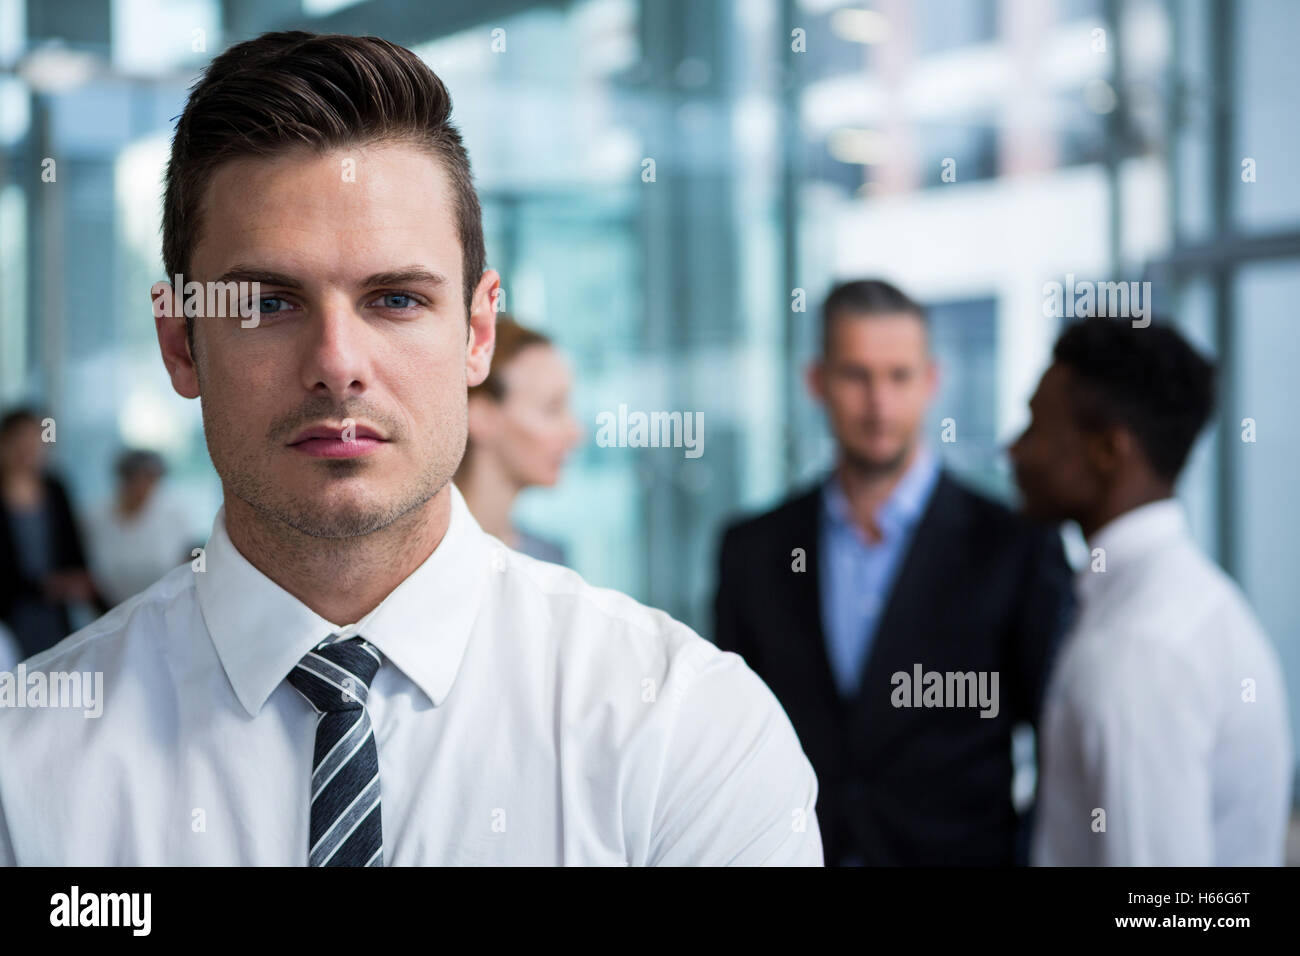 Businessman standing in office building Stock Photo